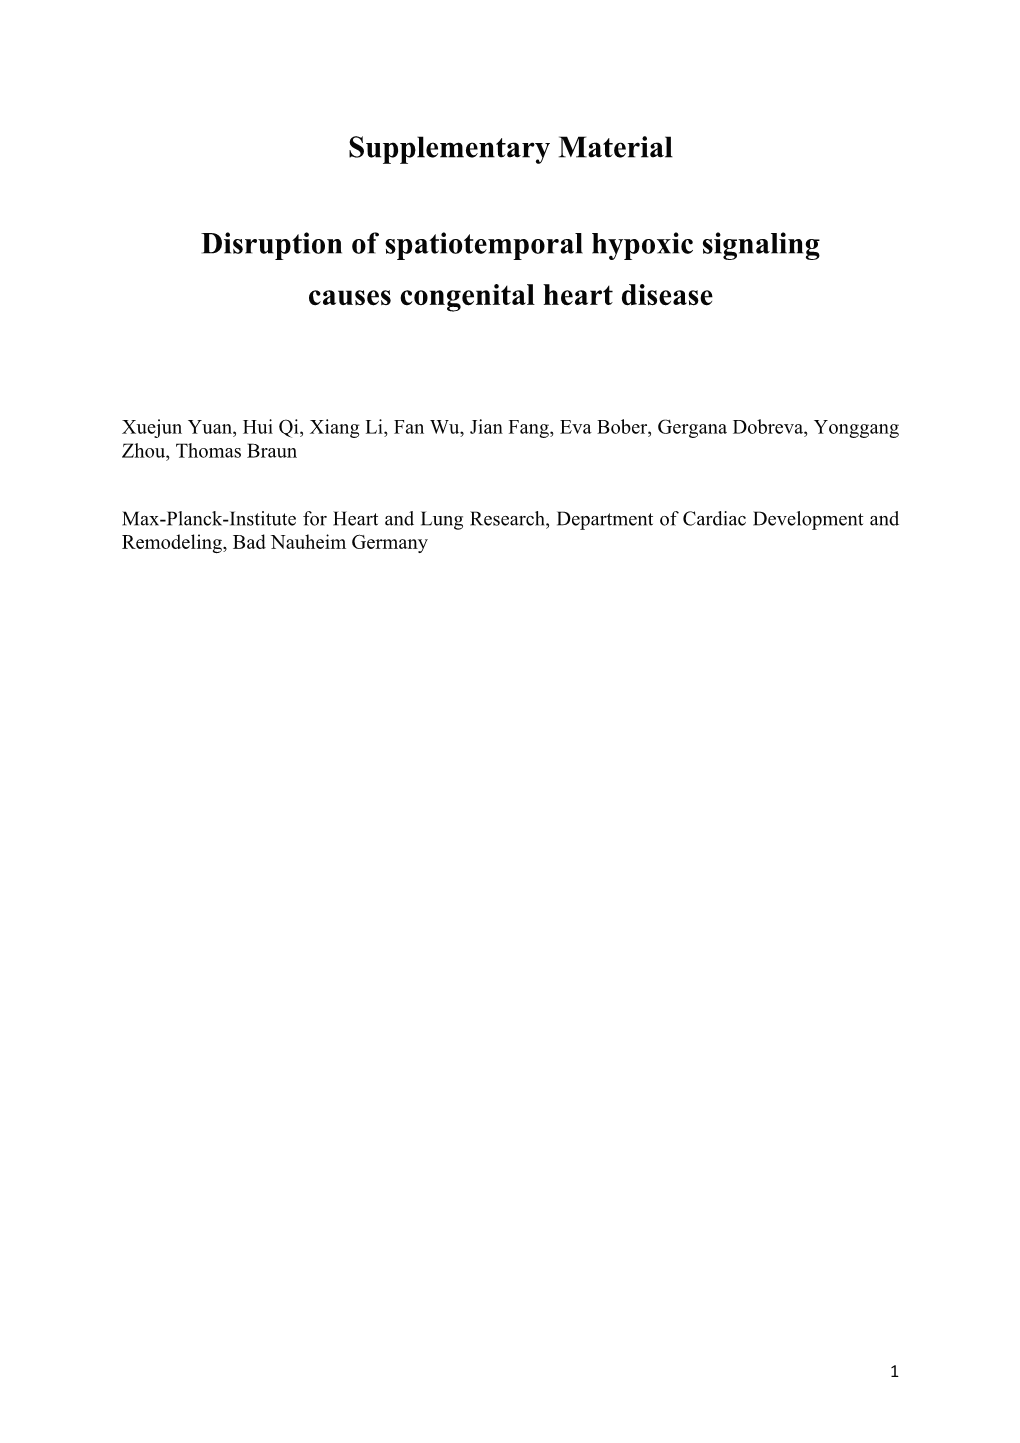 Supplementary Material Disruption of Spatiotemporal Hypoxic Signaling